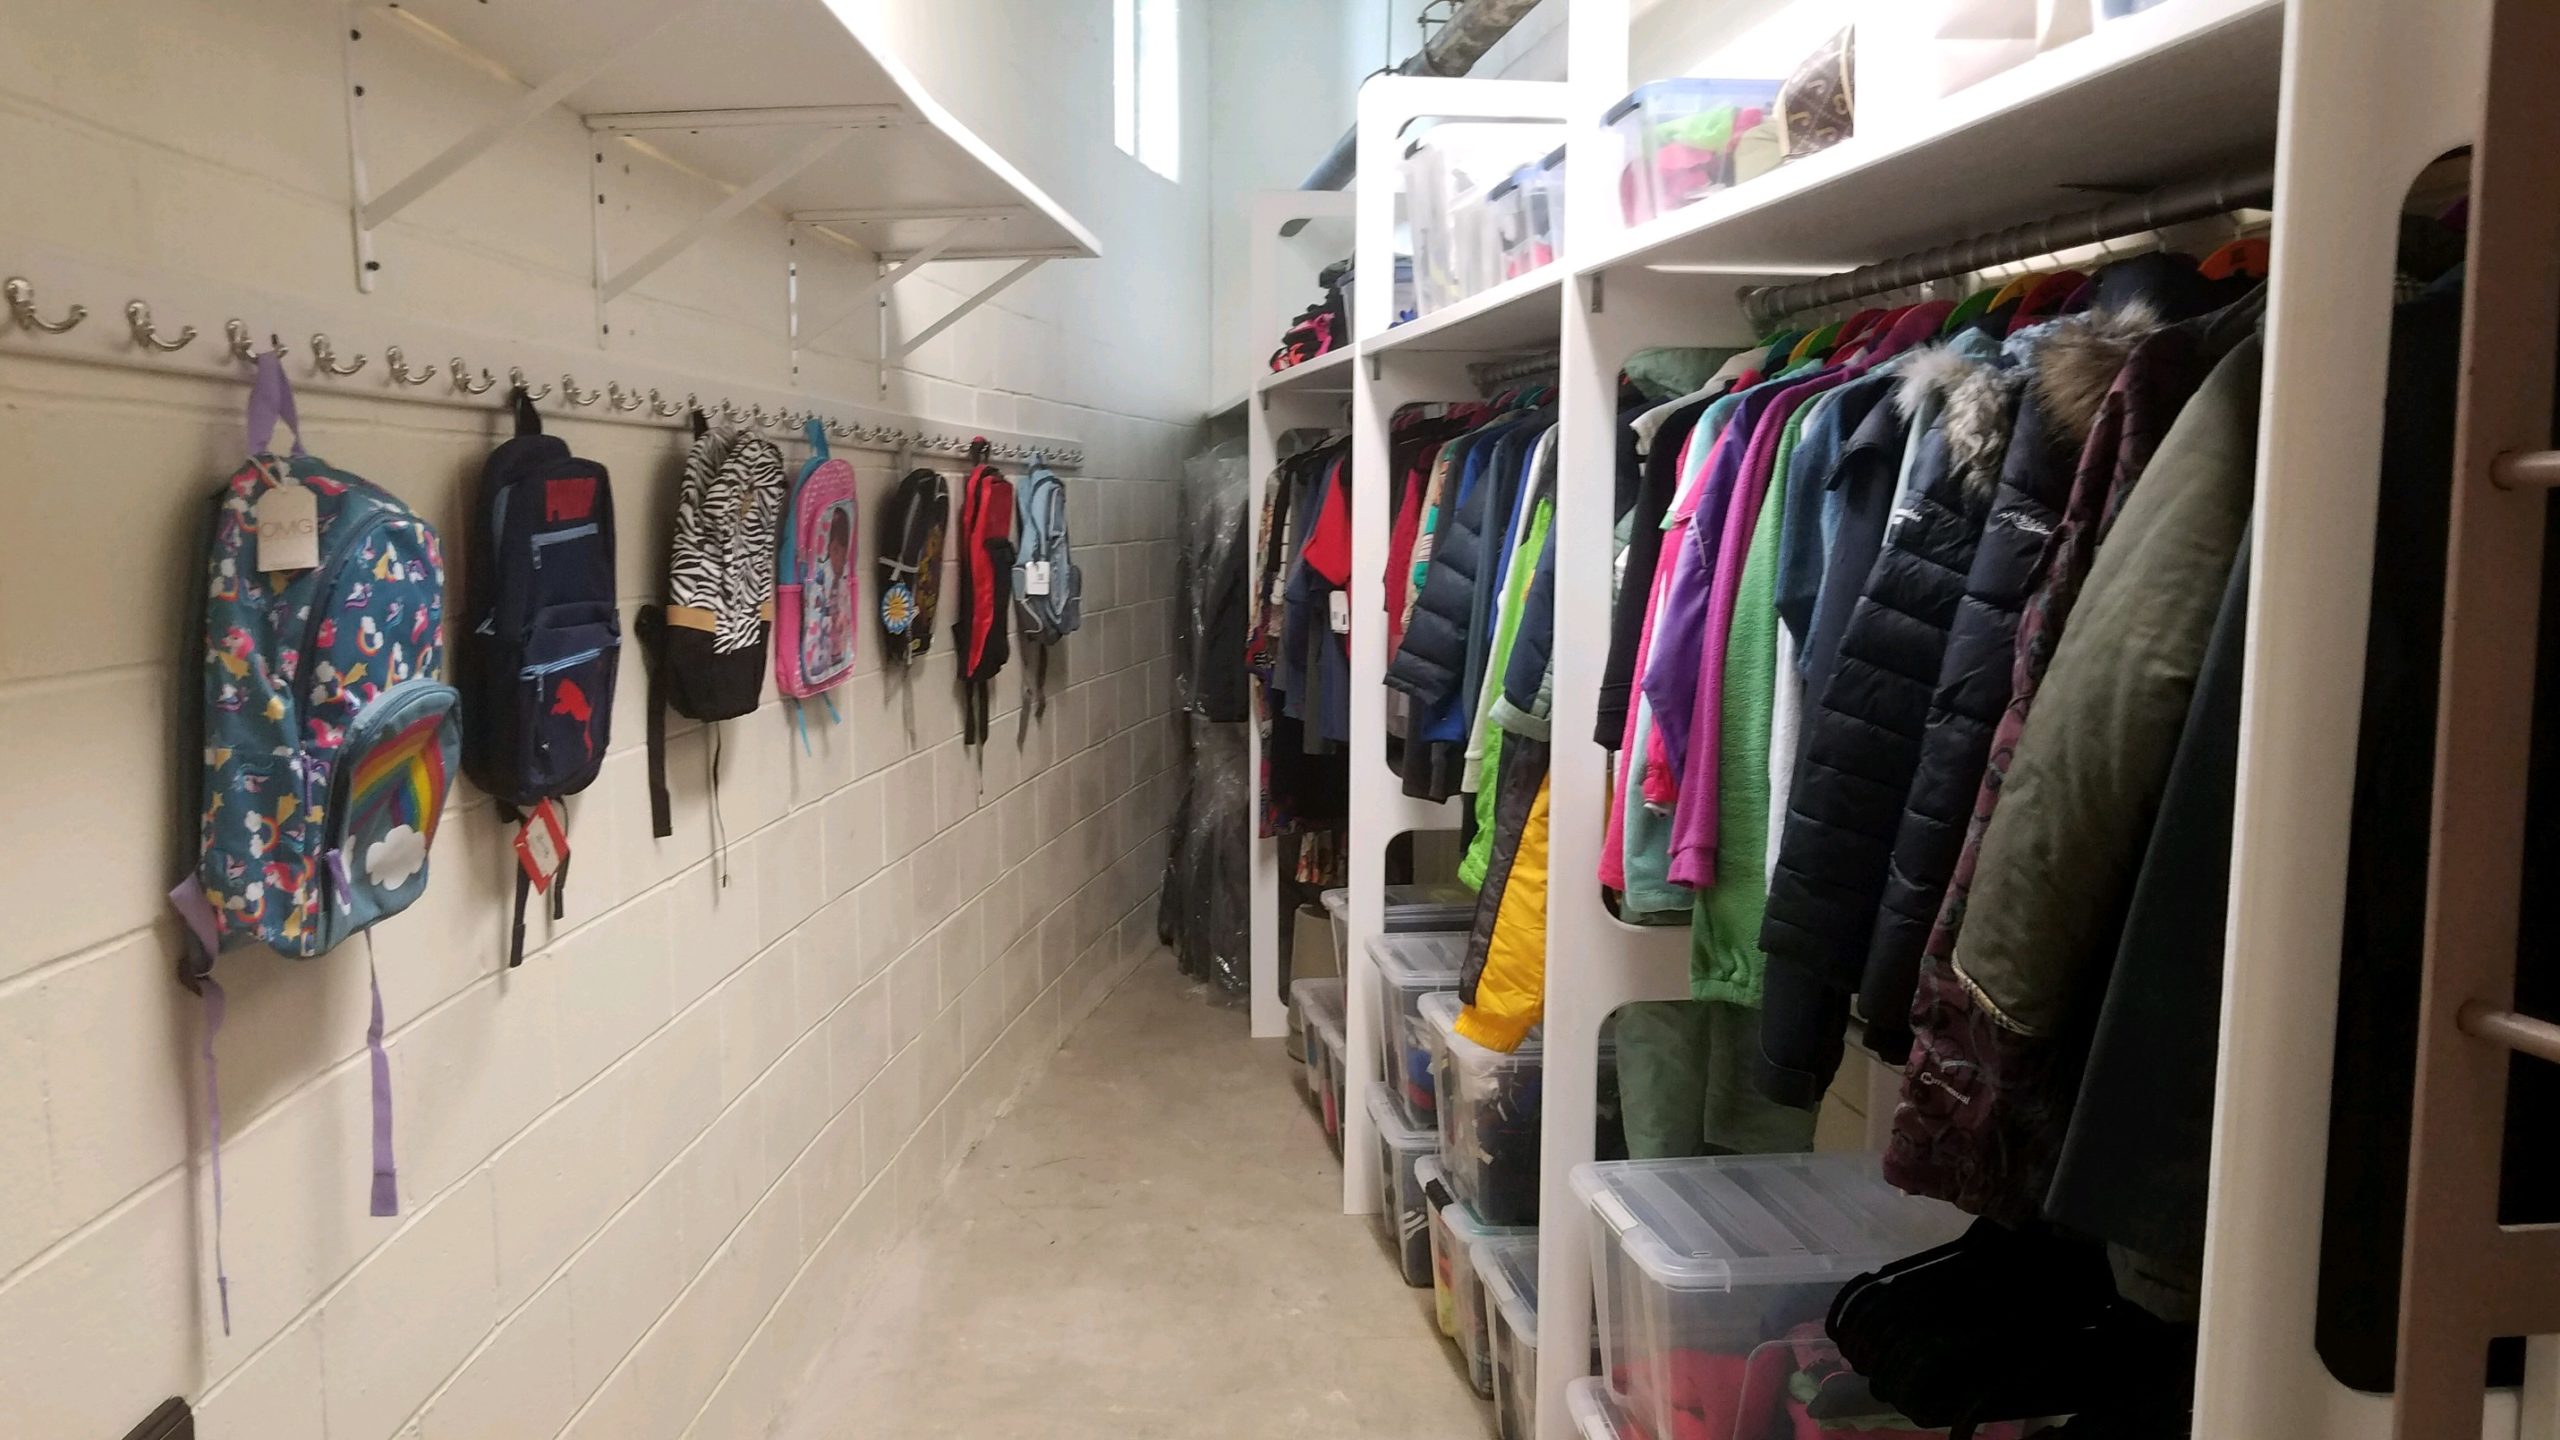 Saddle Rock Elementary School is now home to a clothing pantry to serve students in need. (Photo by Janelle Clausen)